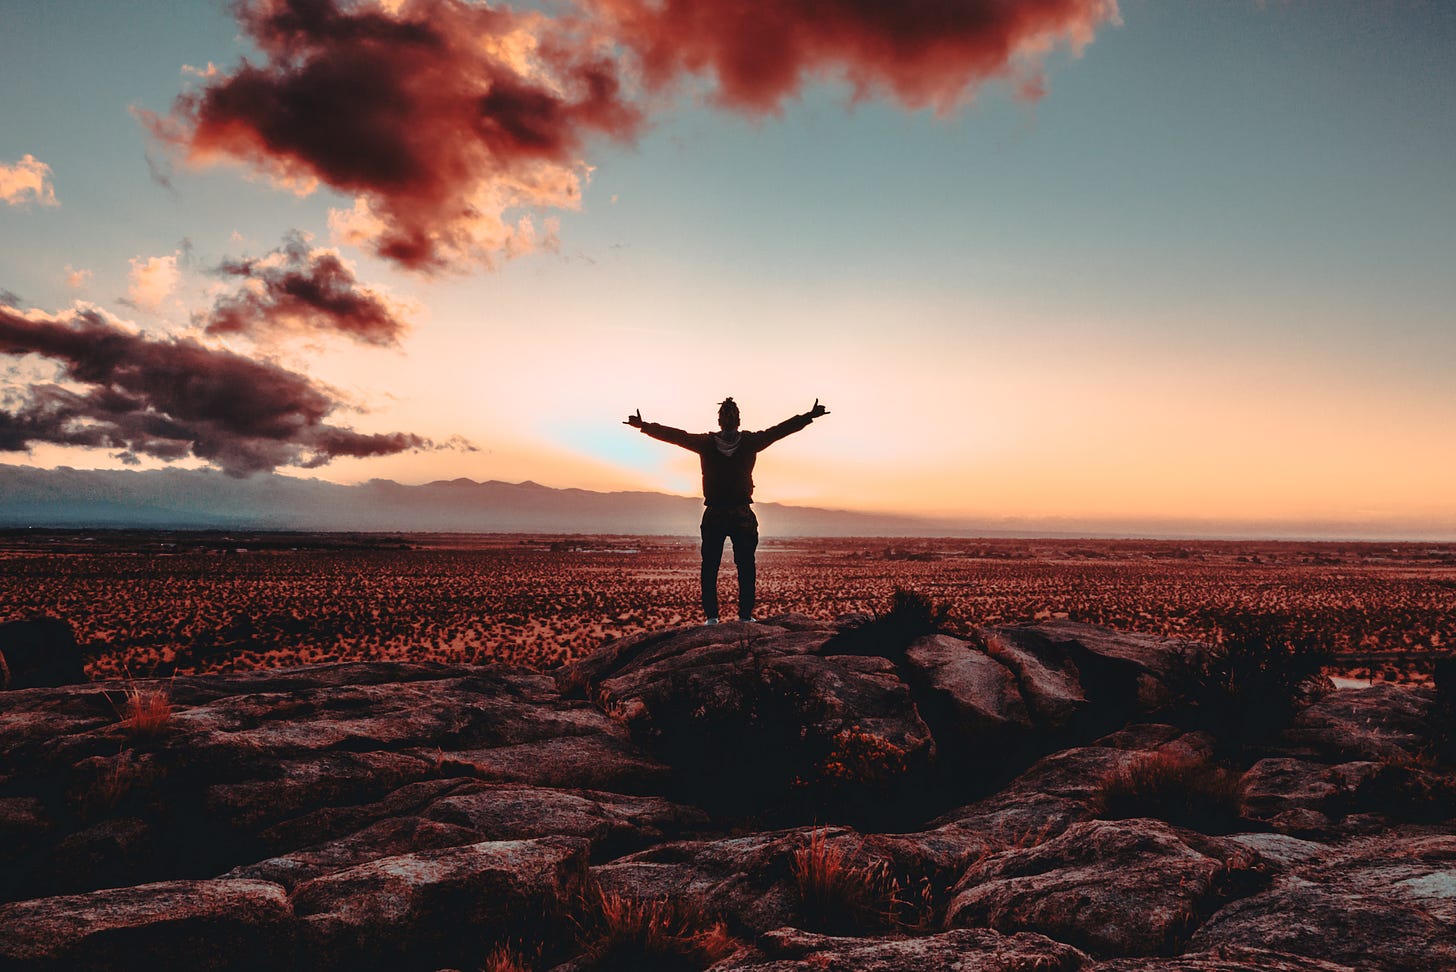 person on hilltop at sunset in power pose with arms outstretched